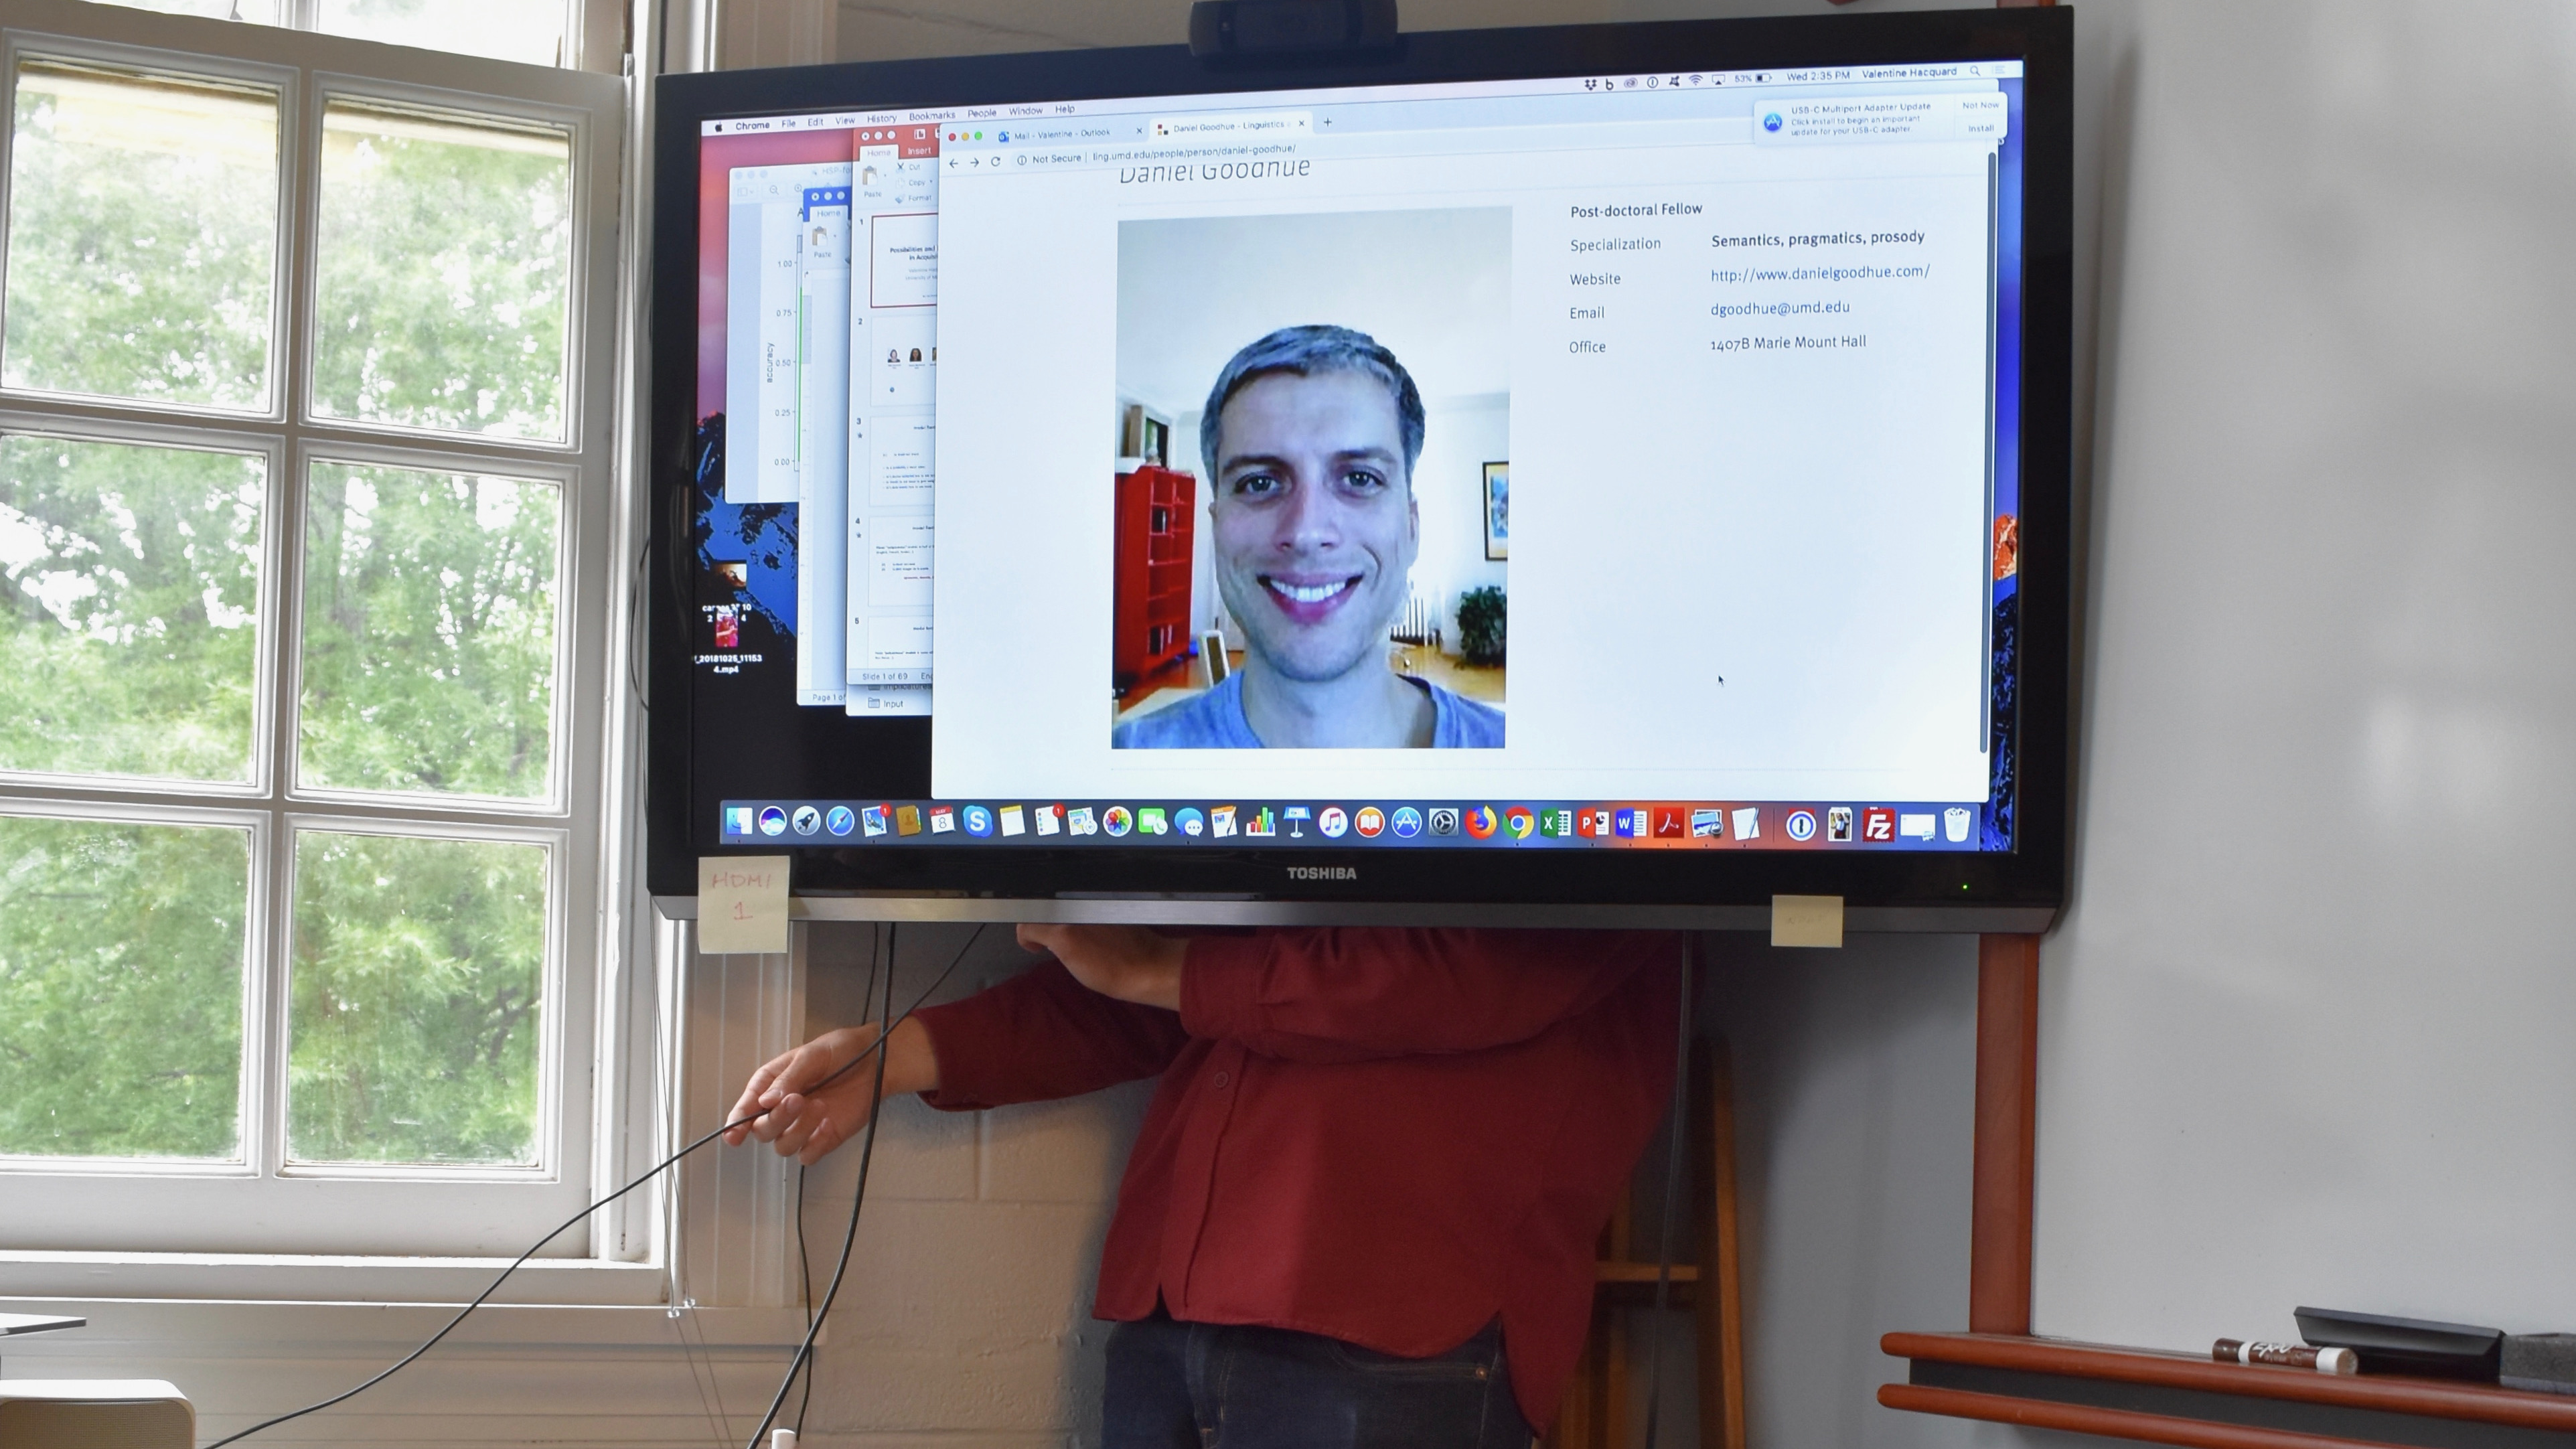 A man standing behind a TV screen, fixing the wires, as the screen displays a portrait of that man's head